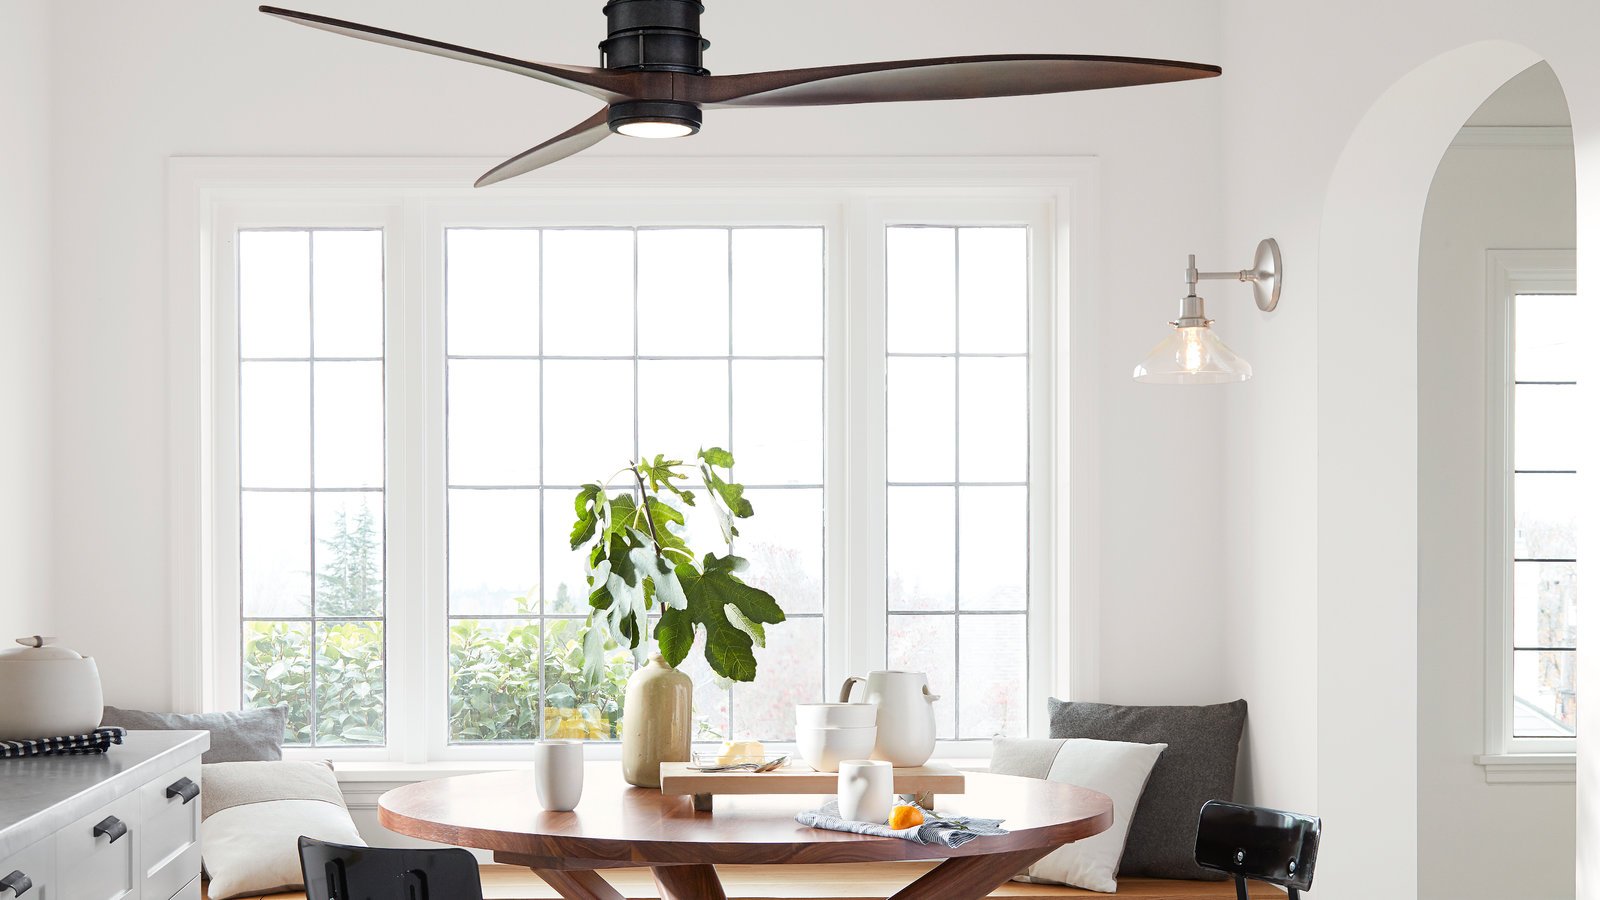 Top 3 Ceiling Lights Questions Answered - Modern Lighting Blog | Woo Lighting & Lifestyle